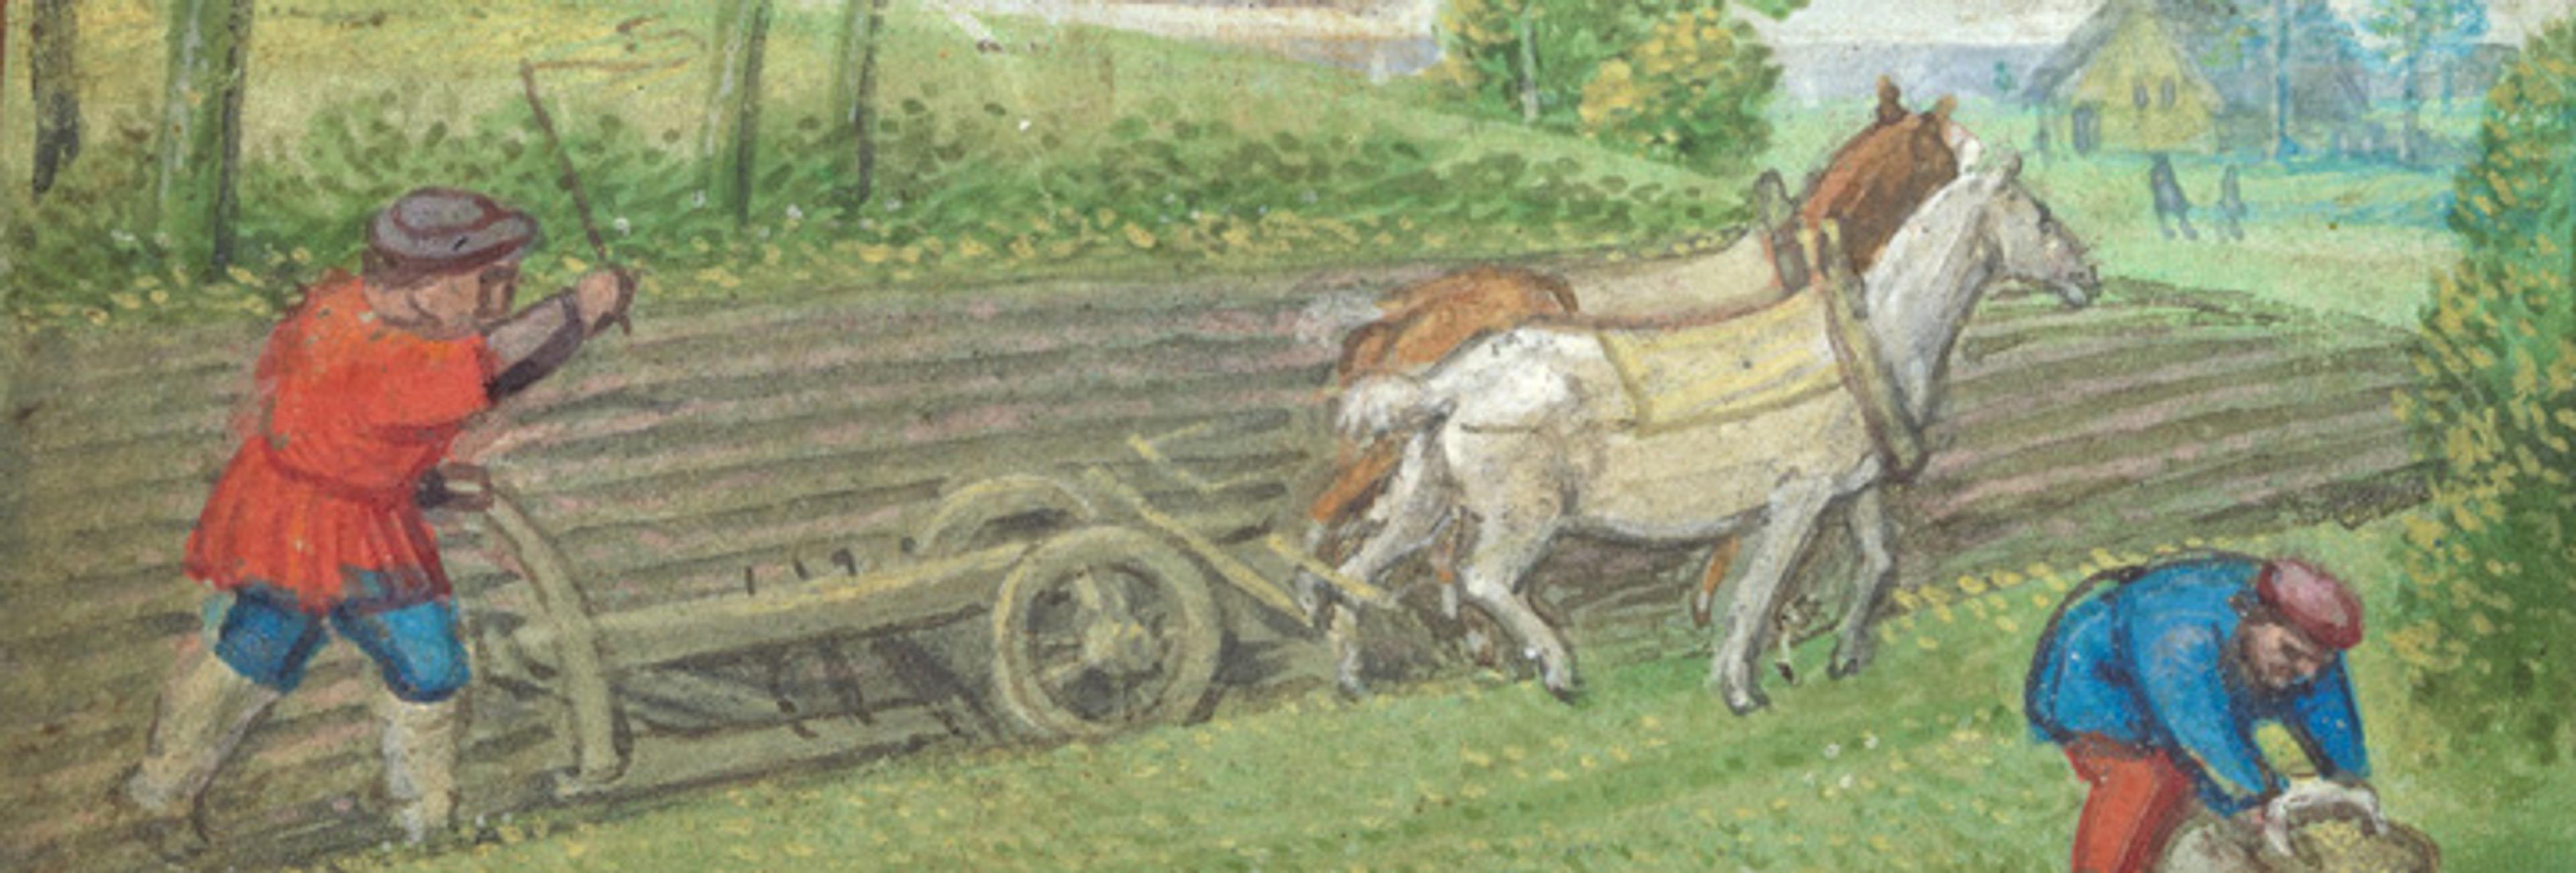 Detail of man with moldboard plow from the recent, extraordinary Cloisters acquisition, Simon Bening's Book of Hours